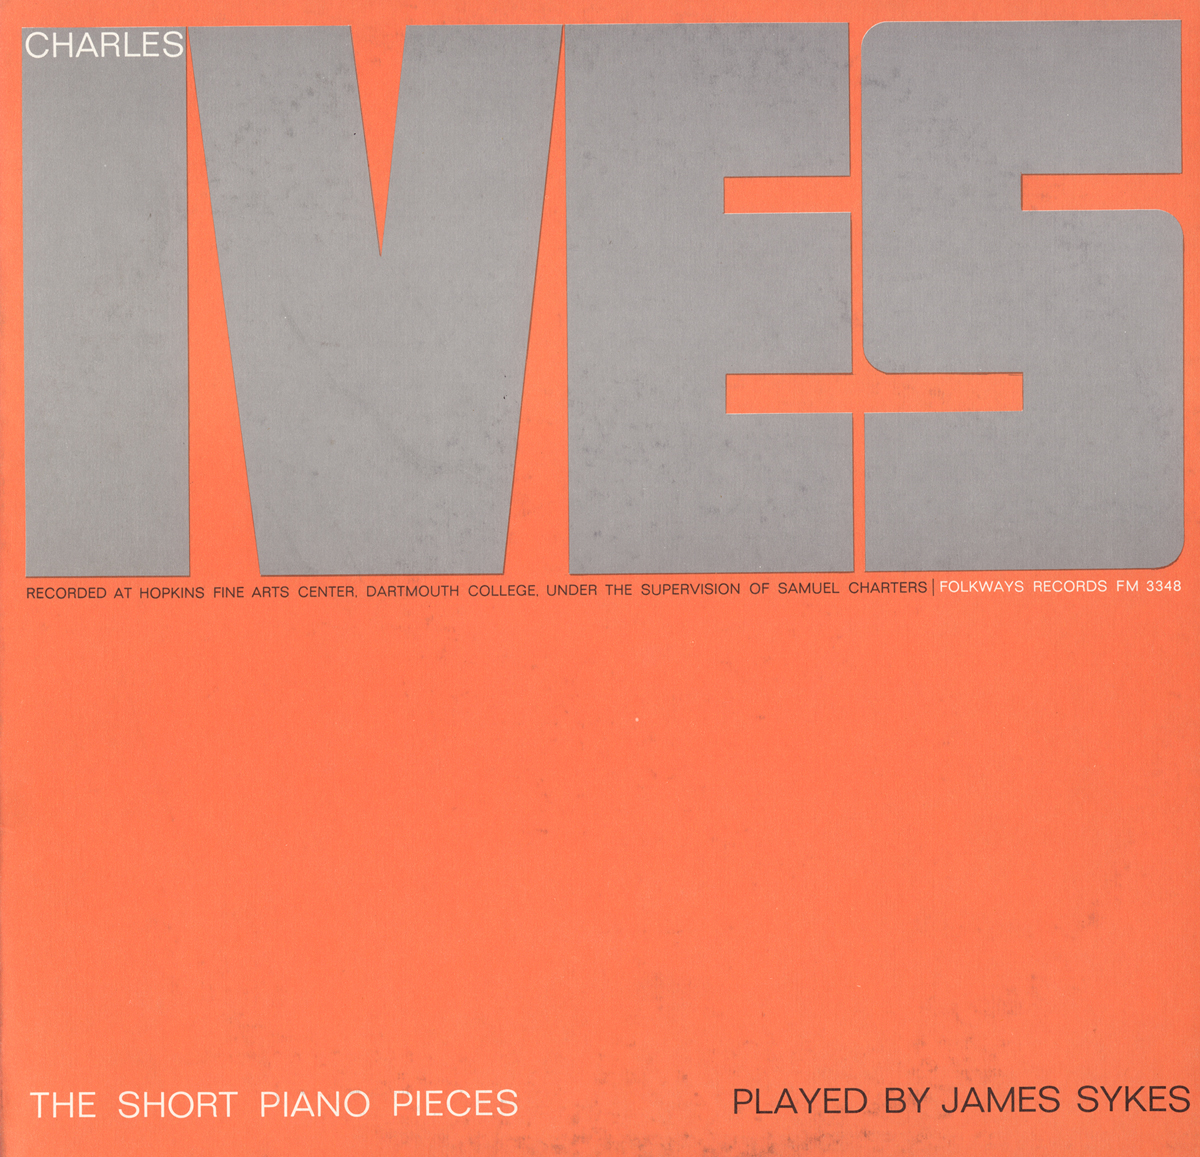 CHARLES IVES: THE SHORT PIANO PIECES